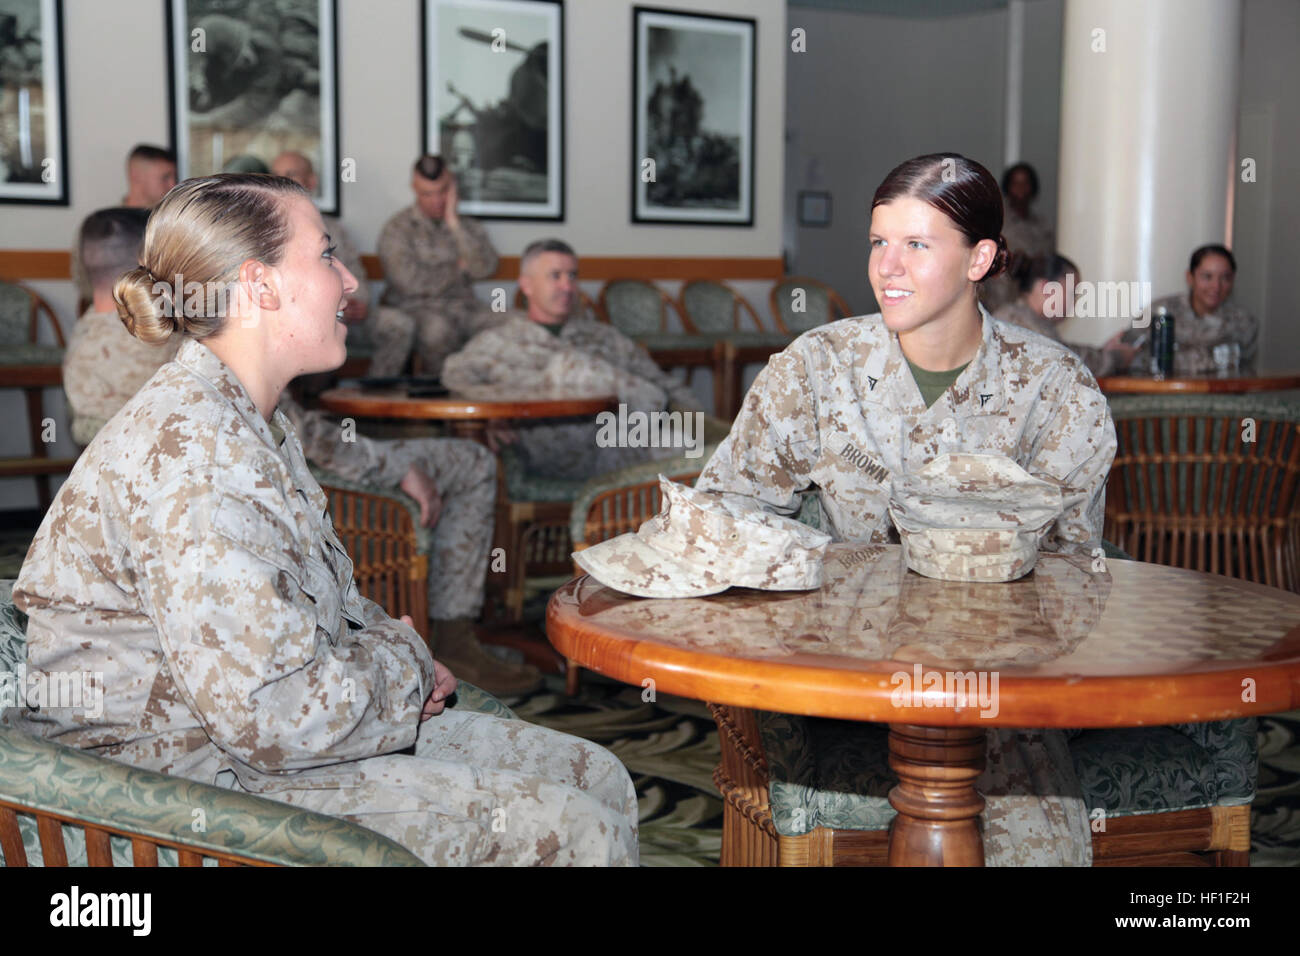 Lance Corporals Kamber L. Borders, left, and Ashlee N. Brown discuss equality during a Women's Equality Day observance luncheon Aug. 30 at Camp Hansen. Borders is a field radio operator and systems administrator with G-6, Communication and Information Systems, III Marine Expeditionary Force. Brown is a data systems technician with 7th Communication Battalion, III MHG, III MEF. (U.S. Marine Corps photo by Lance Cpl. Diamond N. Peden/Released) Many observe, commemorate 19th Ammendment 130830-M-OY715-015 Stock Photo